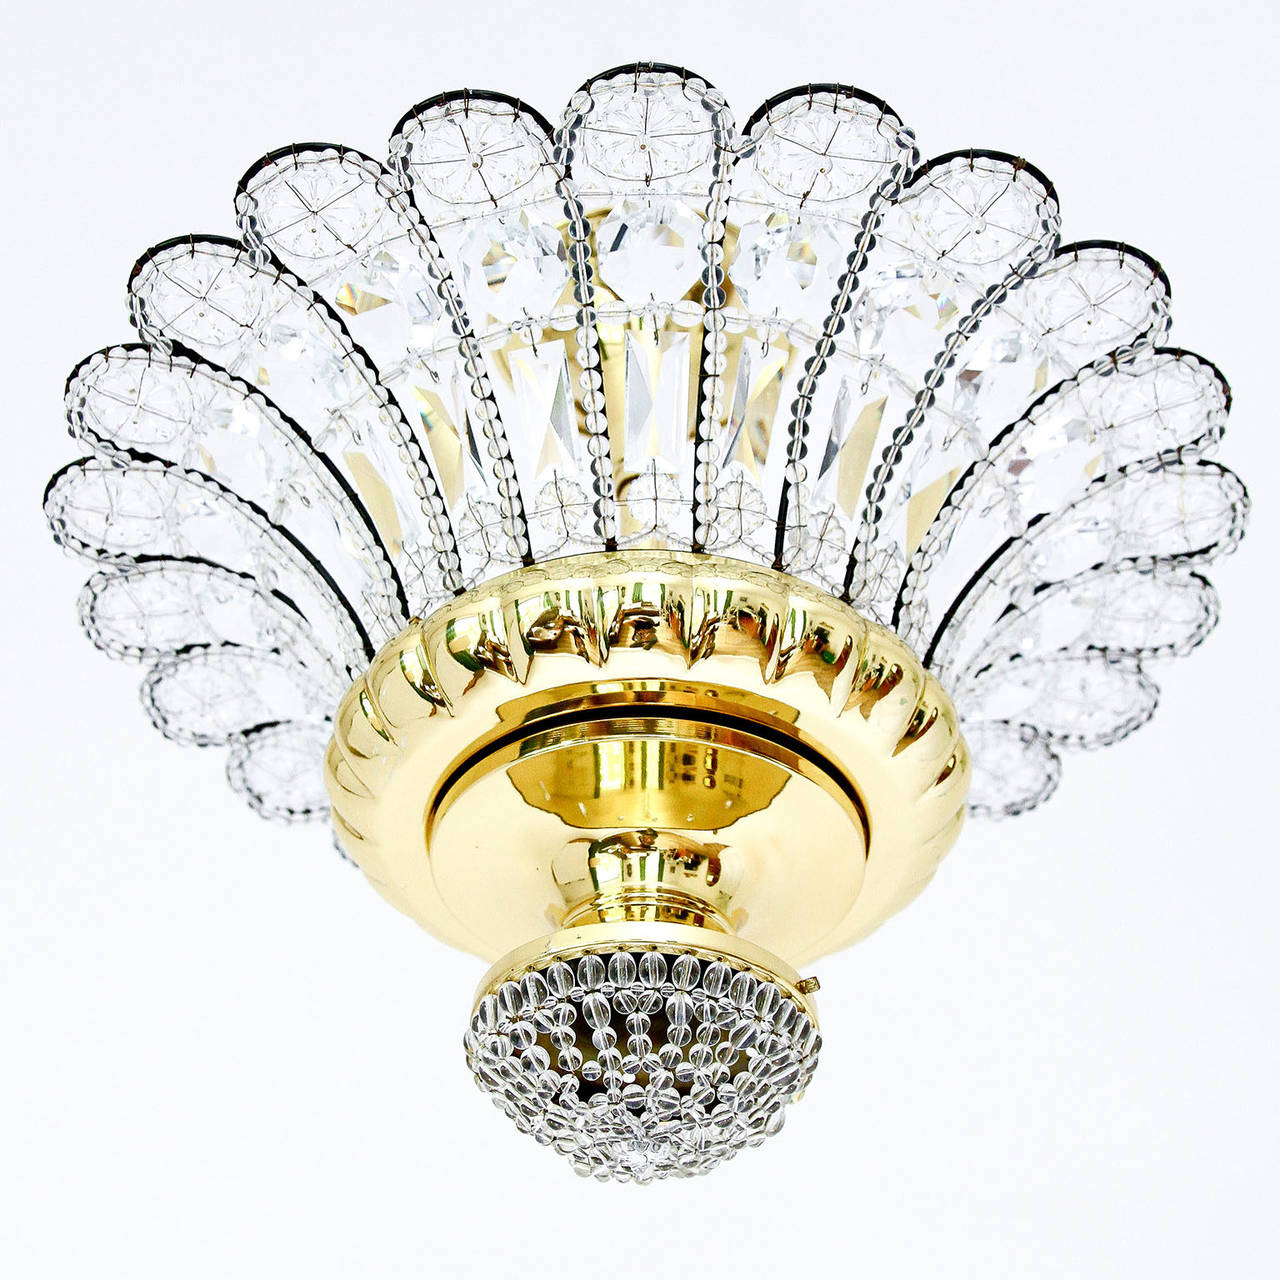 An impressive flush mount light fixture or chandelier by Banci Firenze, Italy. A brass and metal frame is decorated with many cut glass crystals in different shapes and sizes.
The light has seven sockets for medium base bulbs or LEDs.

The price is